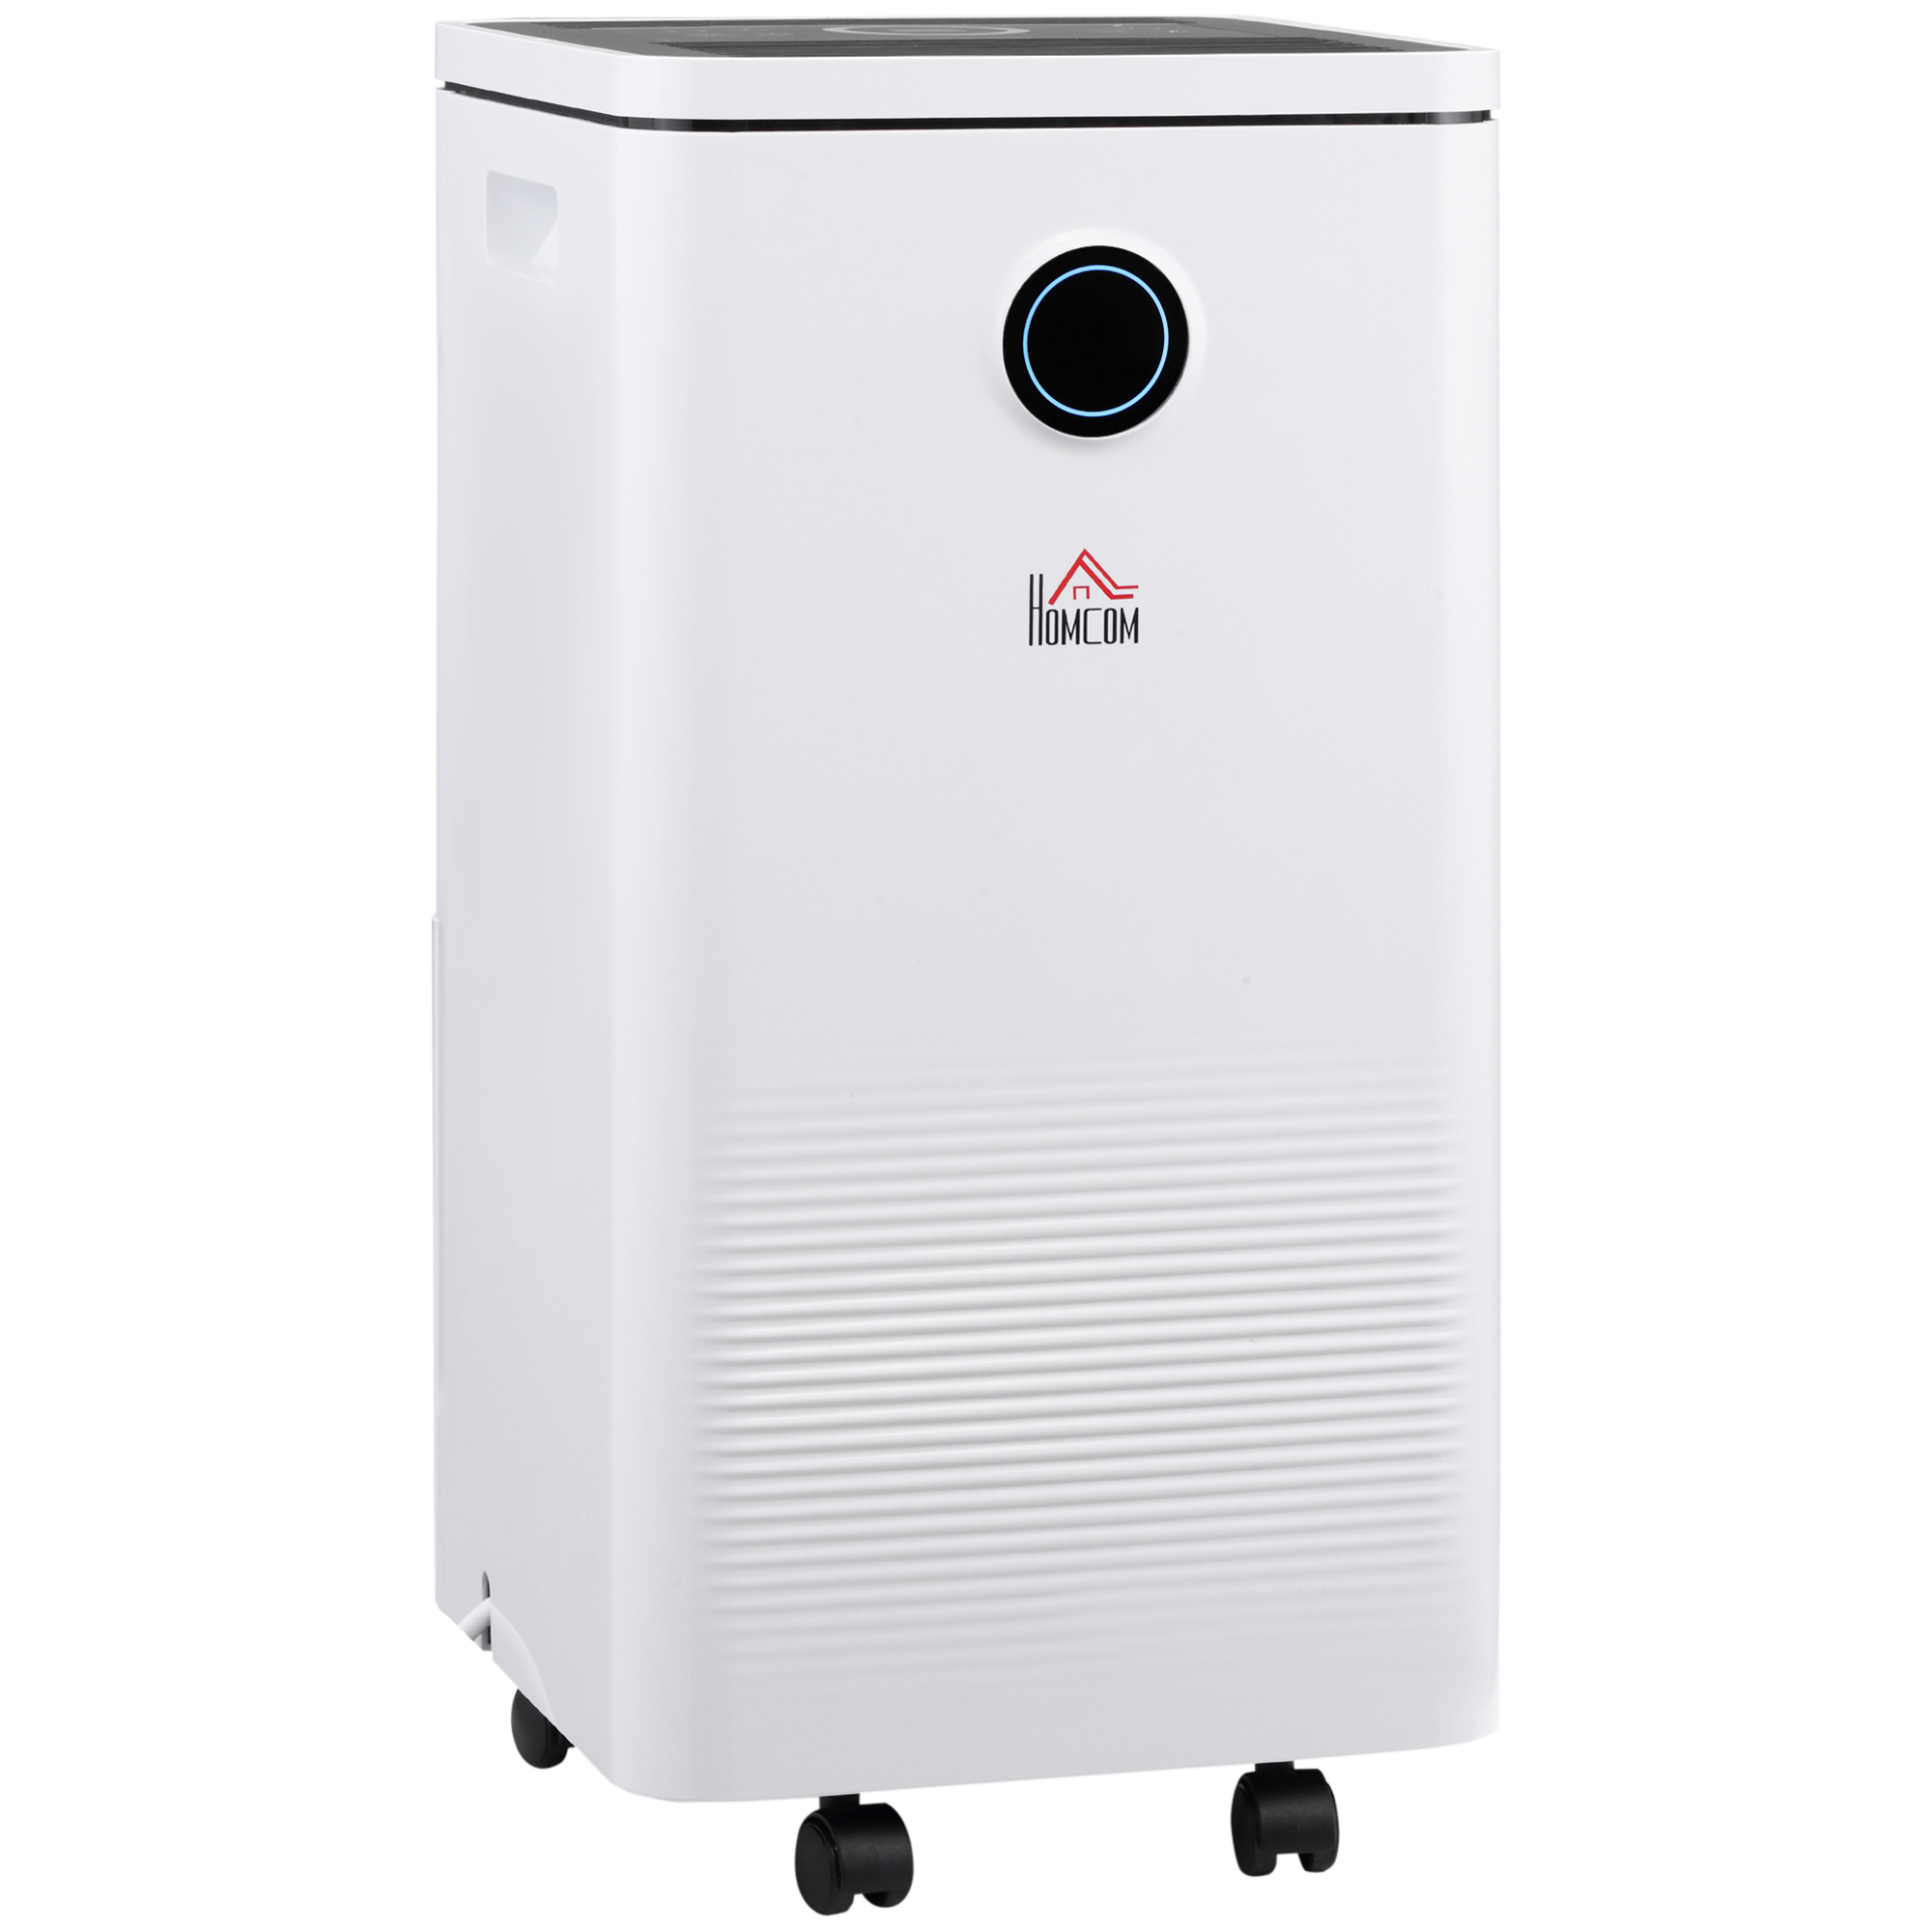 Homcom 10l/day 2500ml Portable Quiet Dehumidifier With Wifi Smart App Control, Electric Moisture Air Dehumidifier For Home Laundry Basement